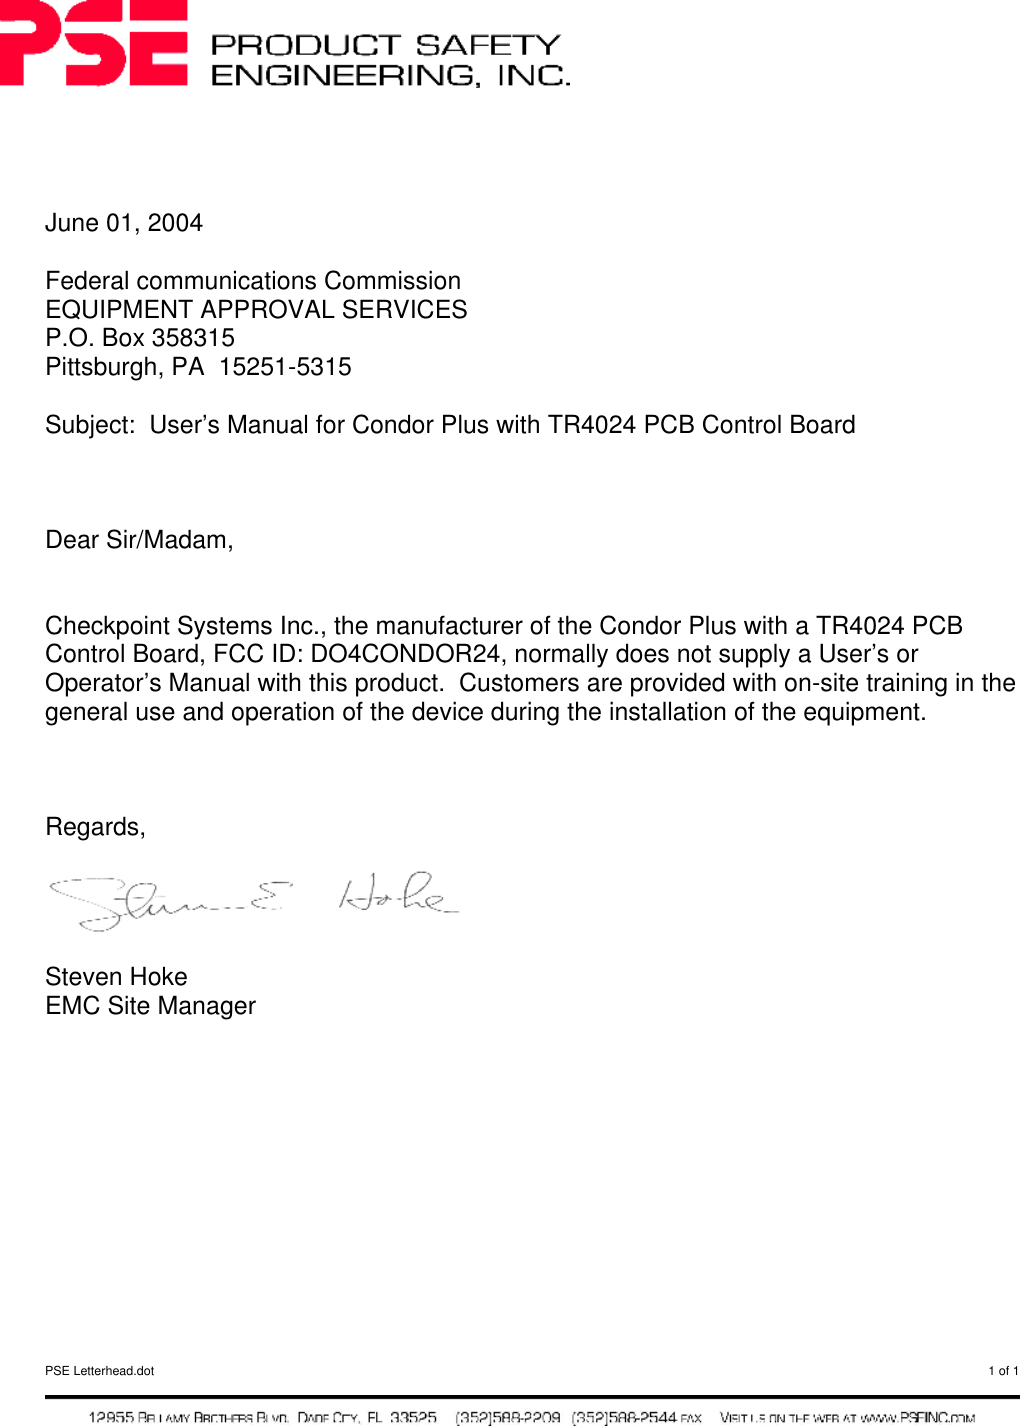  PSE Letterhead.dot  1 of 1       June 01, 2004  Federal communications Commission EQUIPMENT APPROVAL SERVICES P.O. Box 358315 Pittsburgh, PA  15251-5315  Subject:  User’s Manual for Condor Plus with TR4024 PCB Control Board    Dear Sir/Madam,   Checkpoint Systems Inc., the manufacturer of the Condor Plus with a TR4024 PCB Control Board, FCC ID: DO4CONDOR24, normally does not supply a User’s or Operator’s Manual with this product.  Customers are provided with on-site training in the general use and operation of the device during the installation of the equipment.     Regards,    Steven Hoke EMC Site Manager     